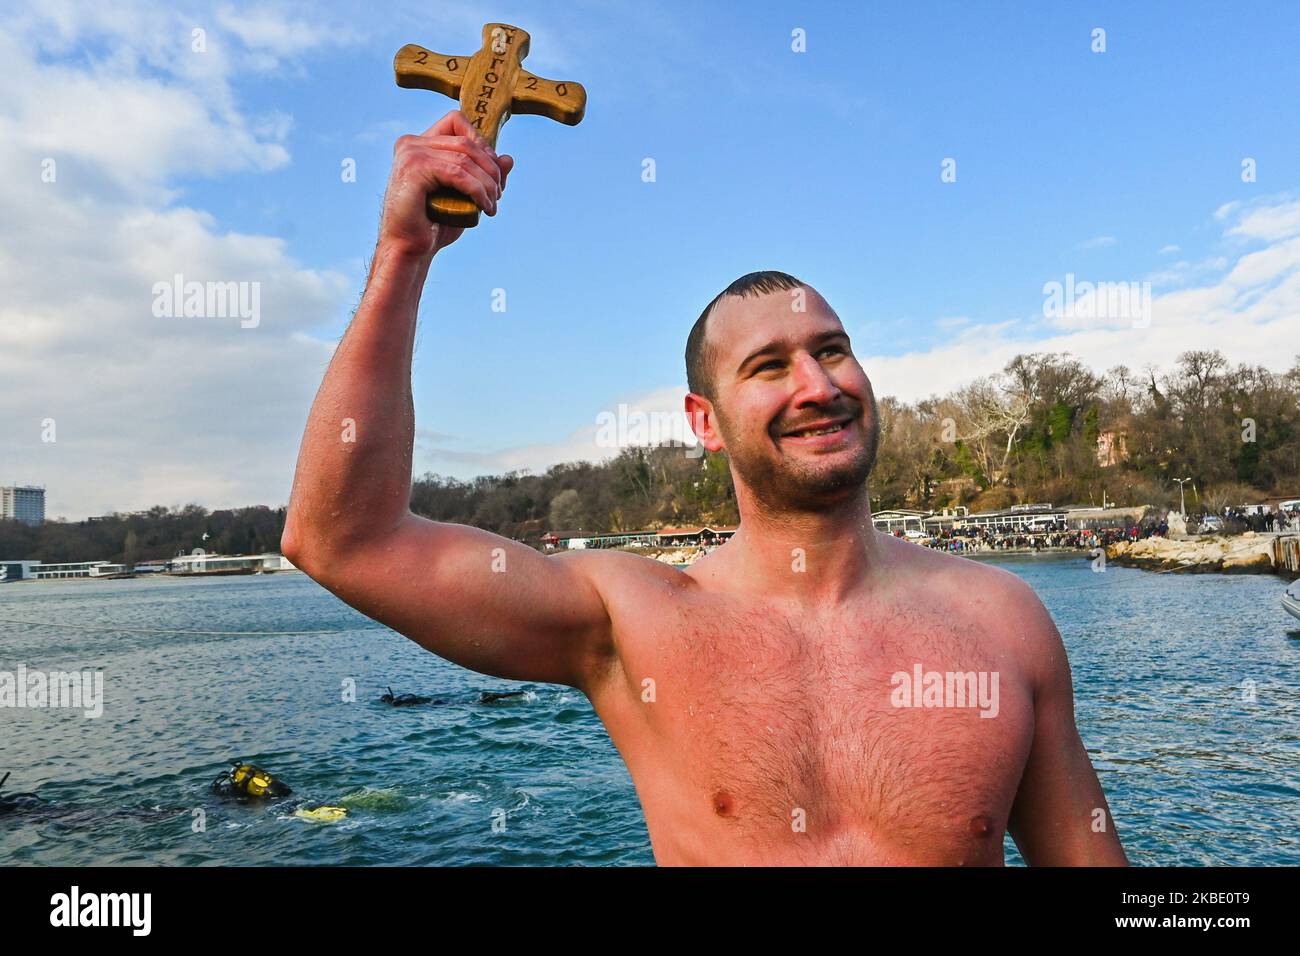 Bulgarians plunge into the icy winter water of the Black sea, to catch a cross during the Epiphany Day celebrations' on 6 January 2020 in Varna, Bulgaria. As a tradition, an Eastern Orthodox priest throws a cross in the river and it is believed that the one who retrieves it will be healthy through the year as well as all those who dance in the icy water. (Photo by: Impact Press Group/NurPhoto) Stock Photo